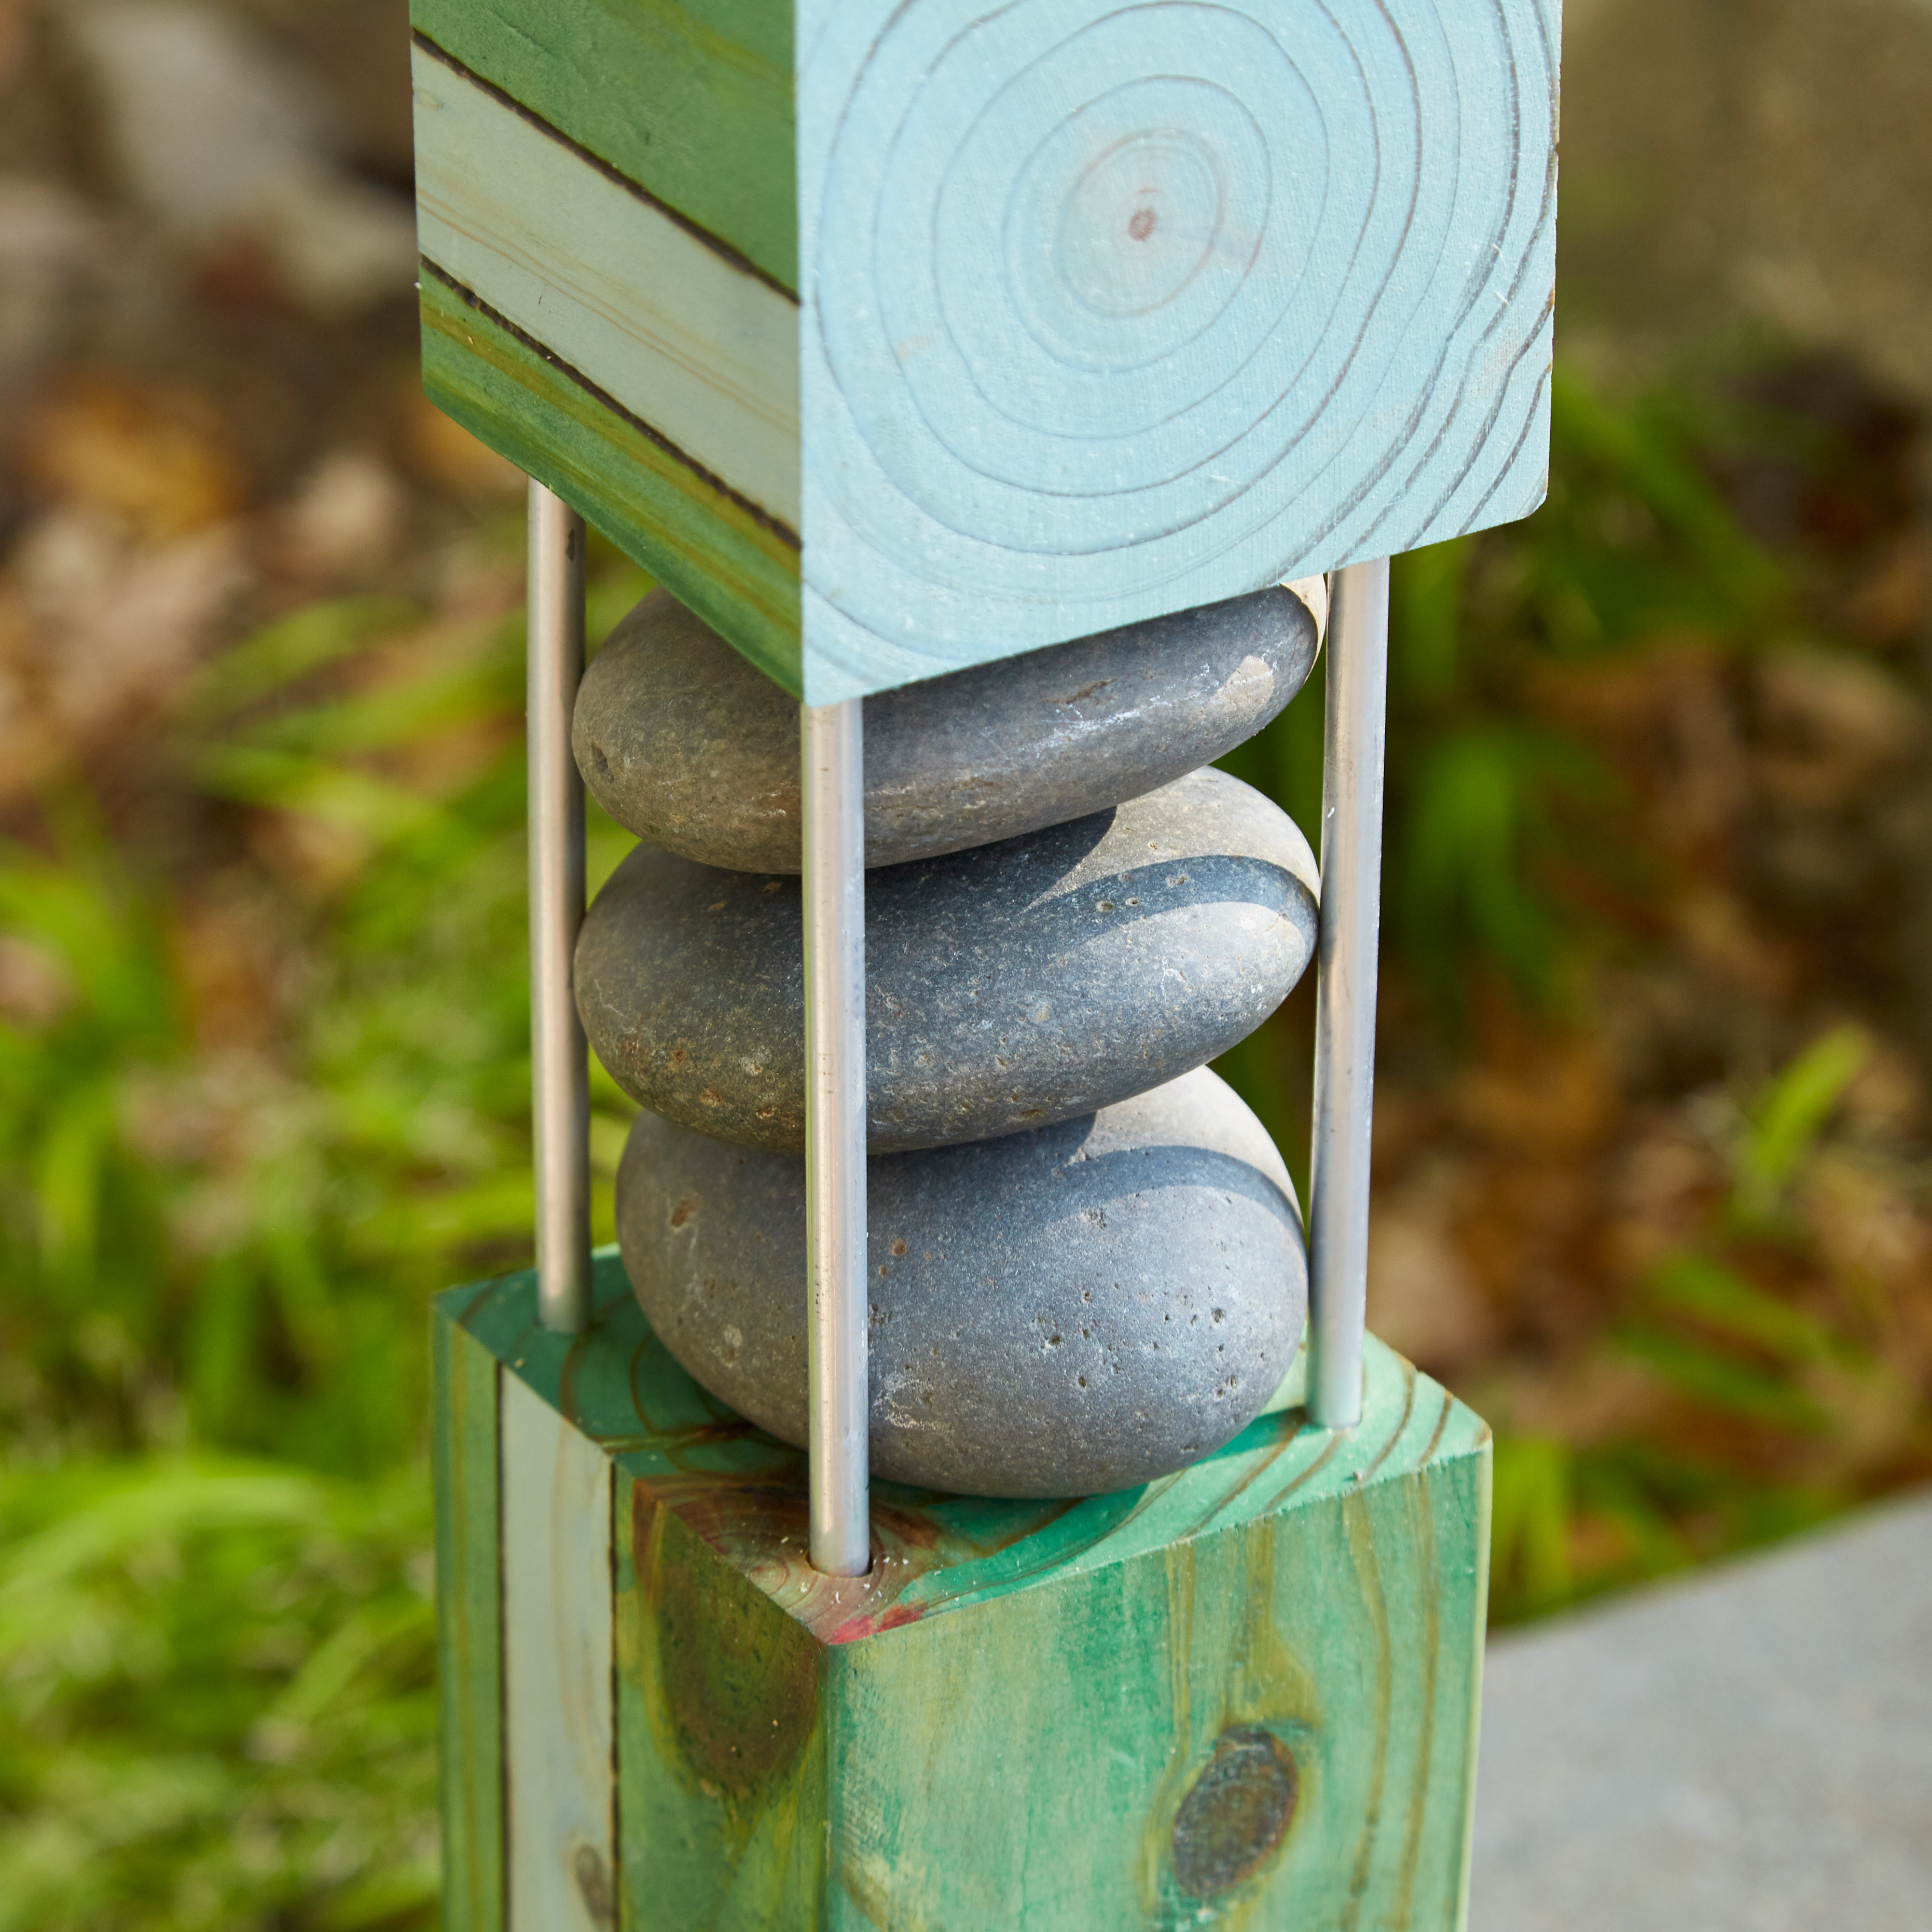 diy-garden-poles-river-rocks: Cut each 1/4-inch aluminum rod 2 inches longer than the height of the stack. Drill holes 1 inch deep.